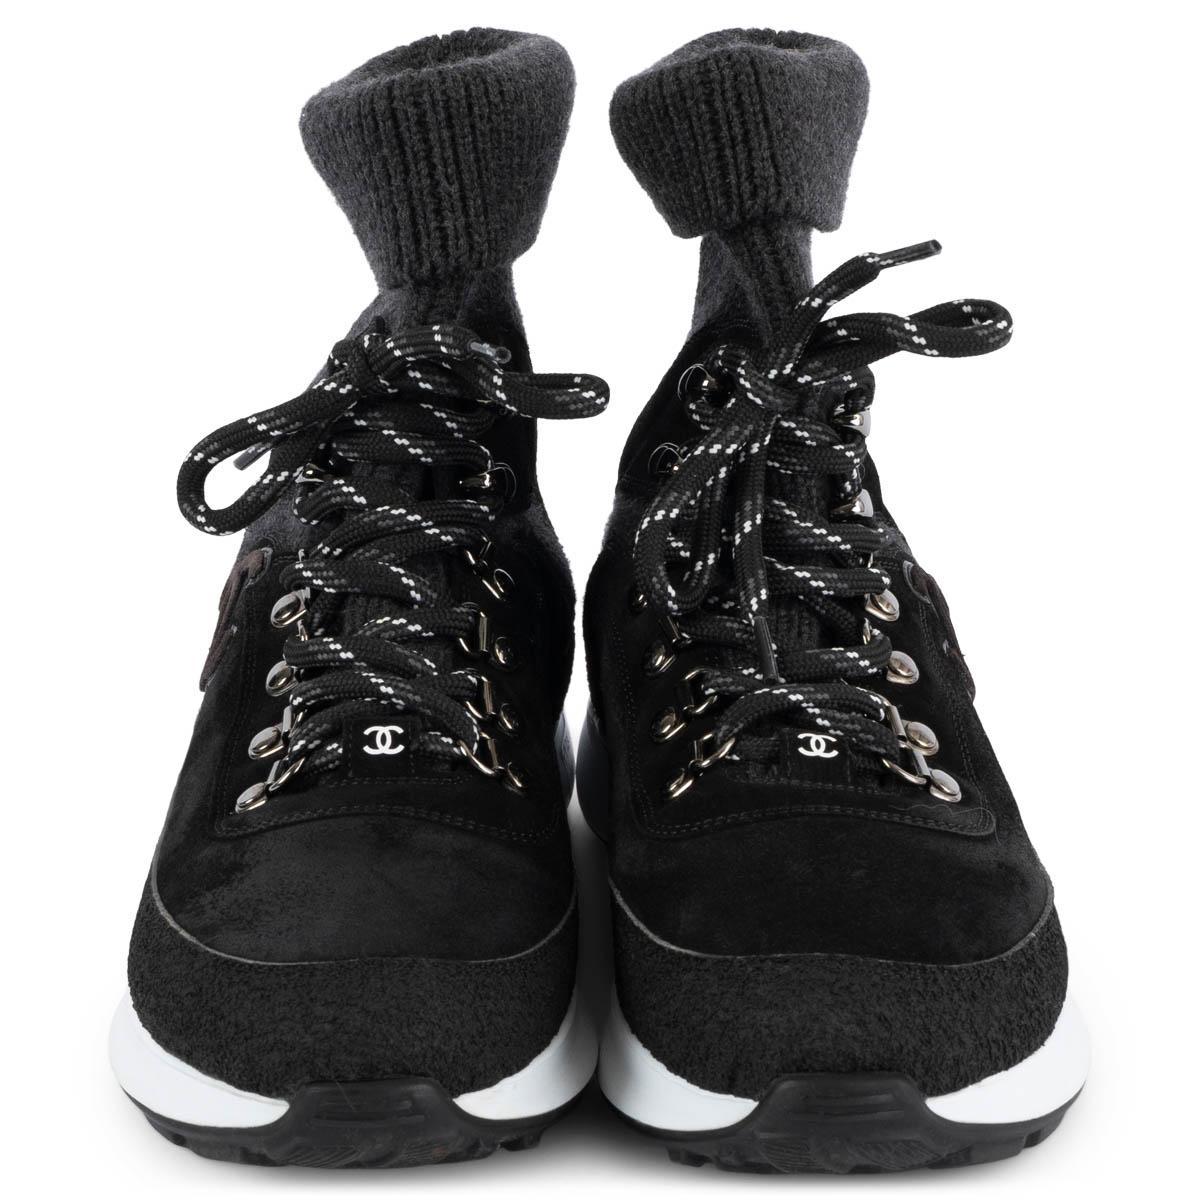 100% authentic Chanel 2021 lace-up high-top sock sneakers in black suede, rubber and anthracite rib knit set on a white rubber sole. Have been worn and are in excellent condition. 

Measurements
Model	Chanel21K G38497 Y55617
Imprinted Size	38
Shoe